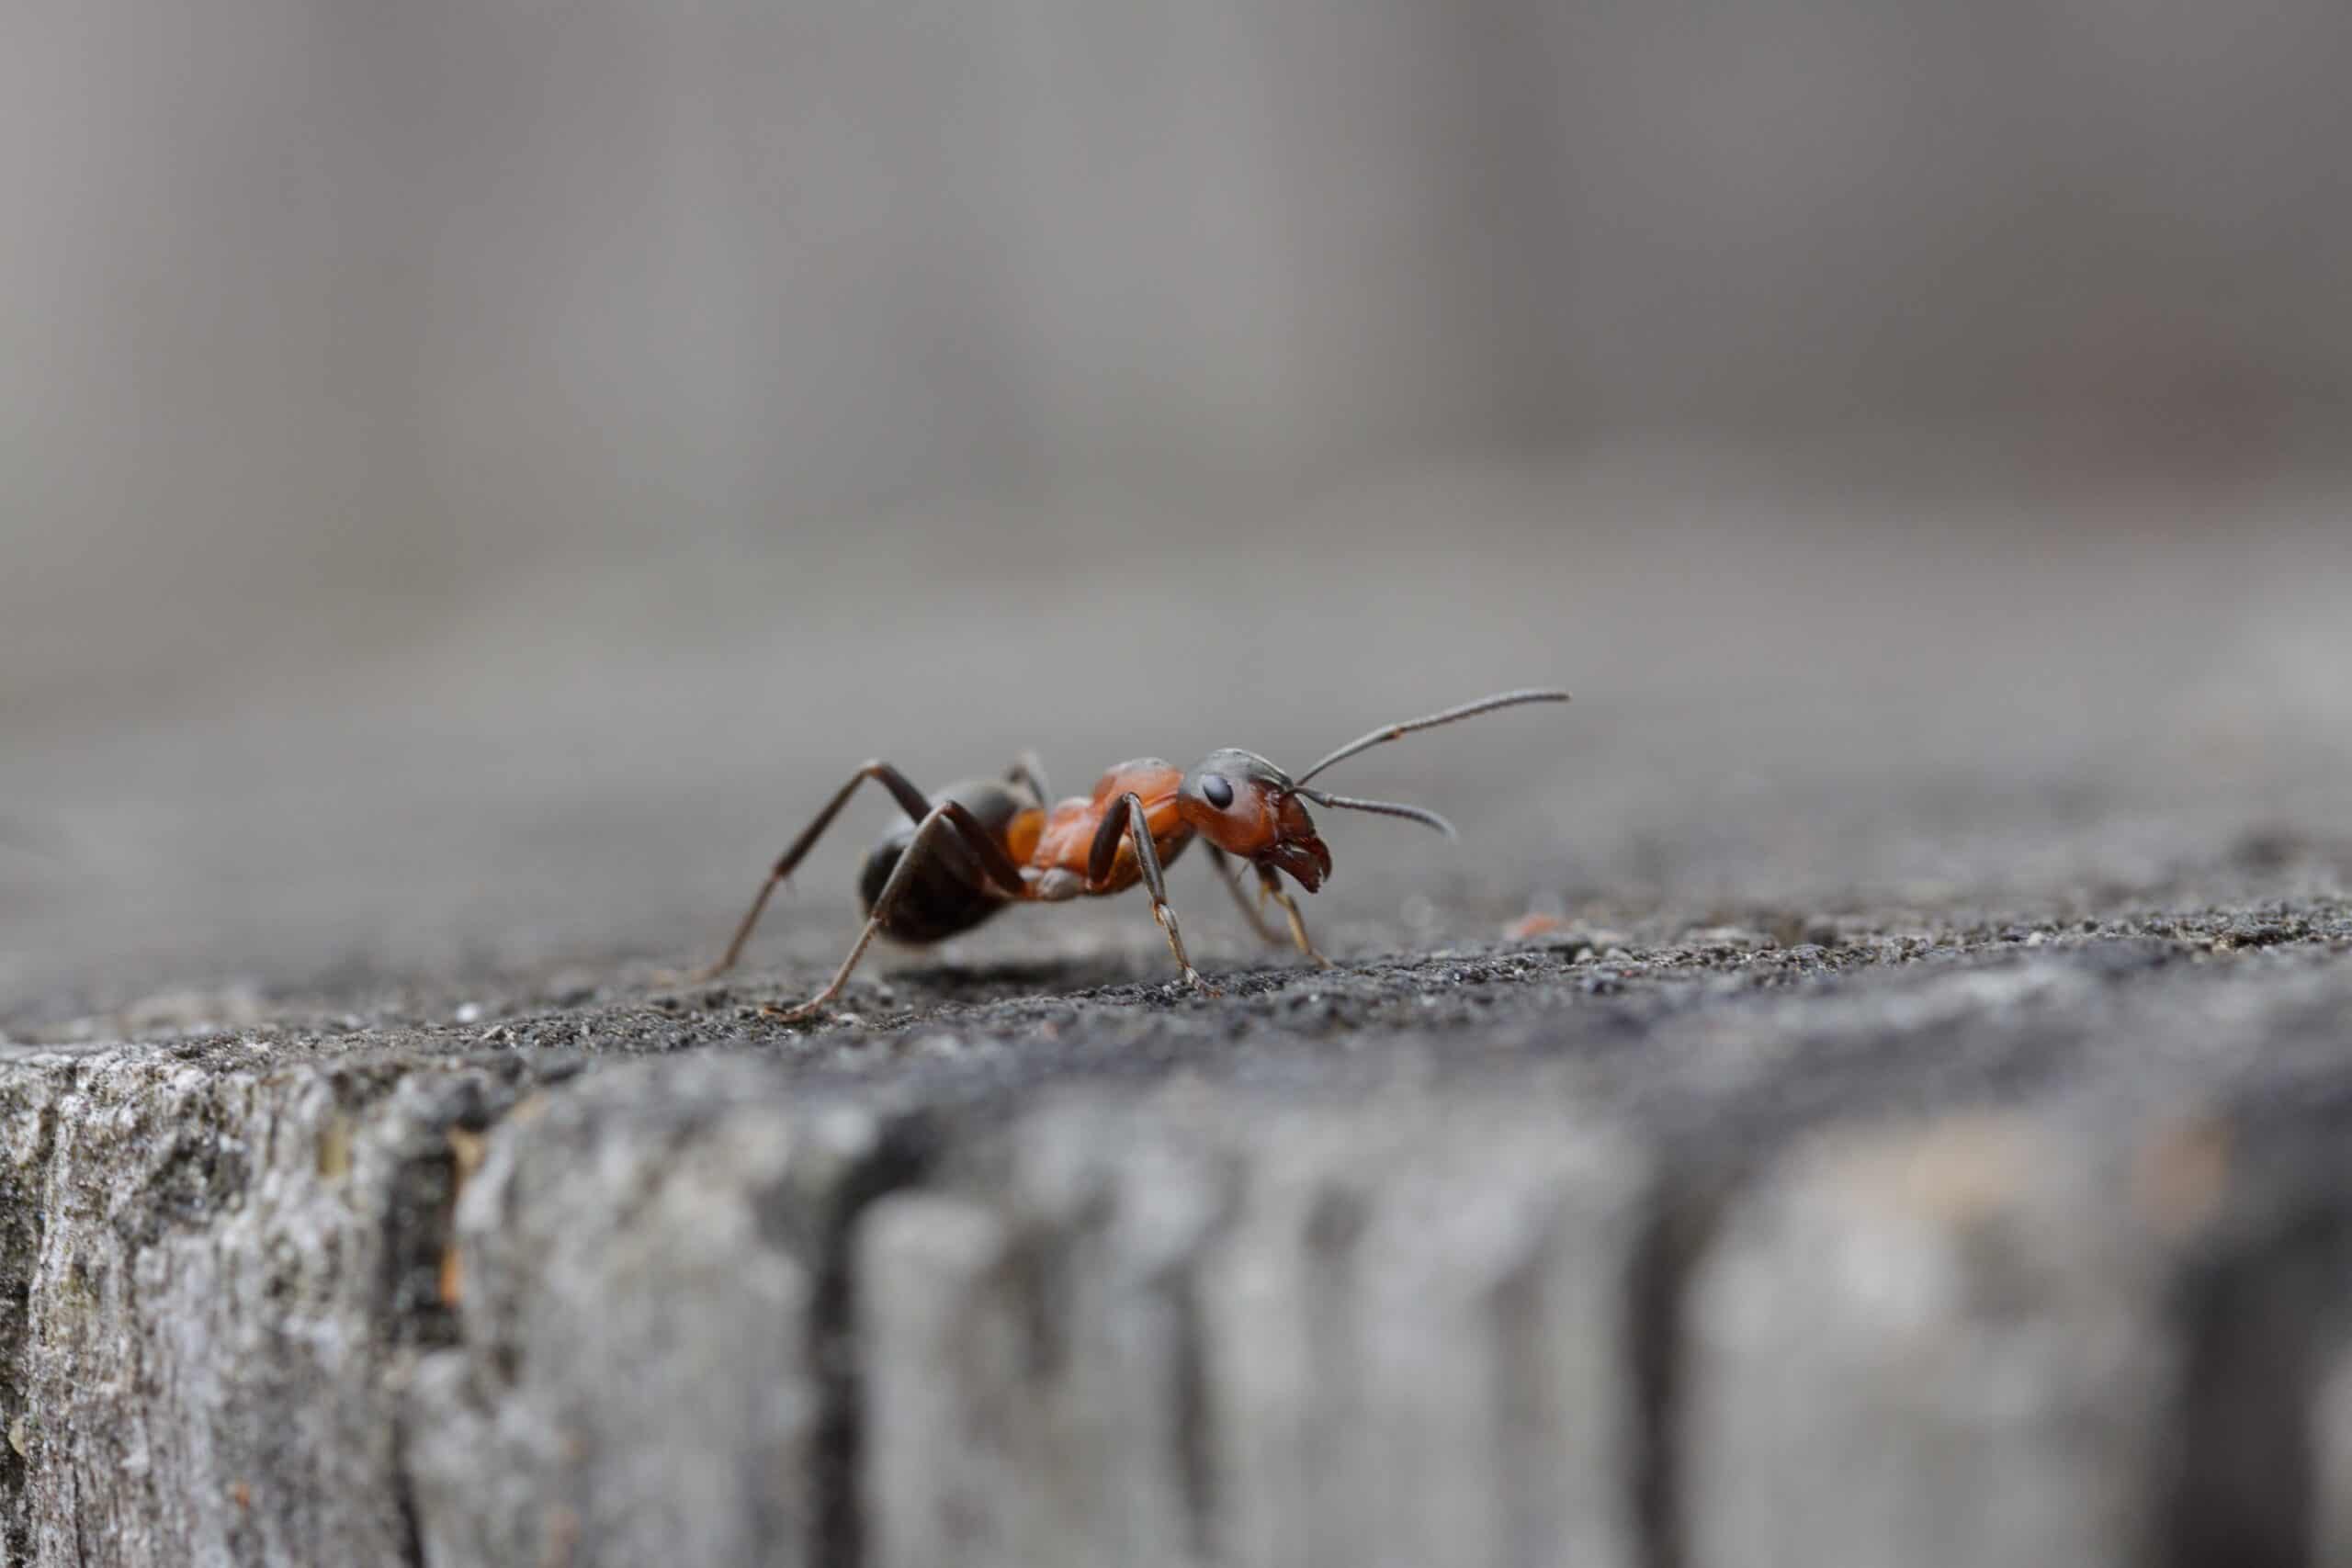 How To Get a Queen Ant Out of Her Nest